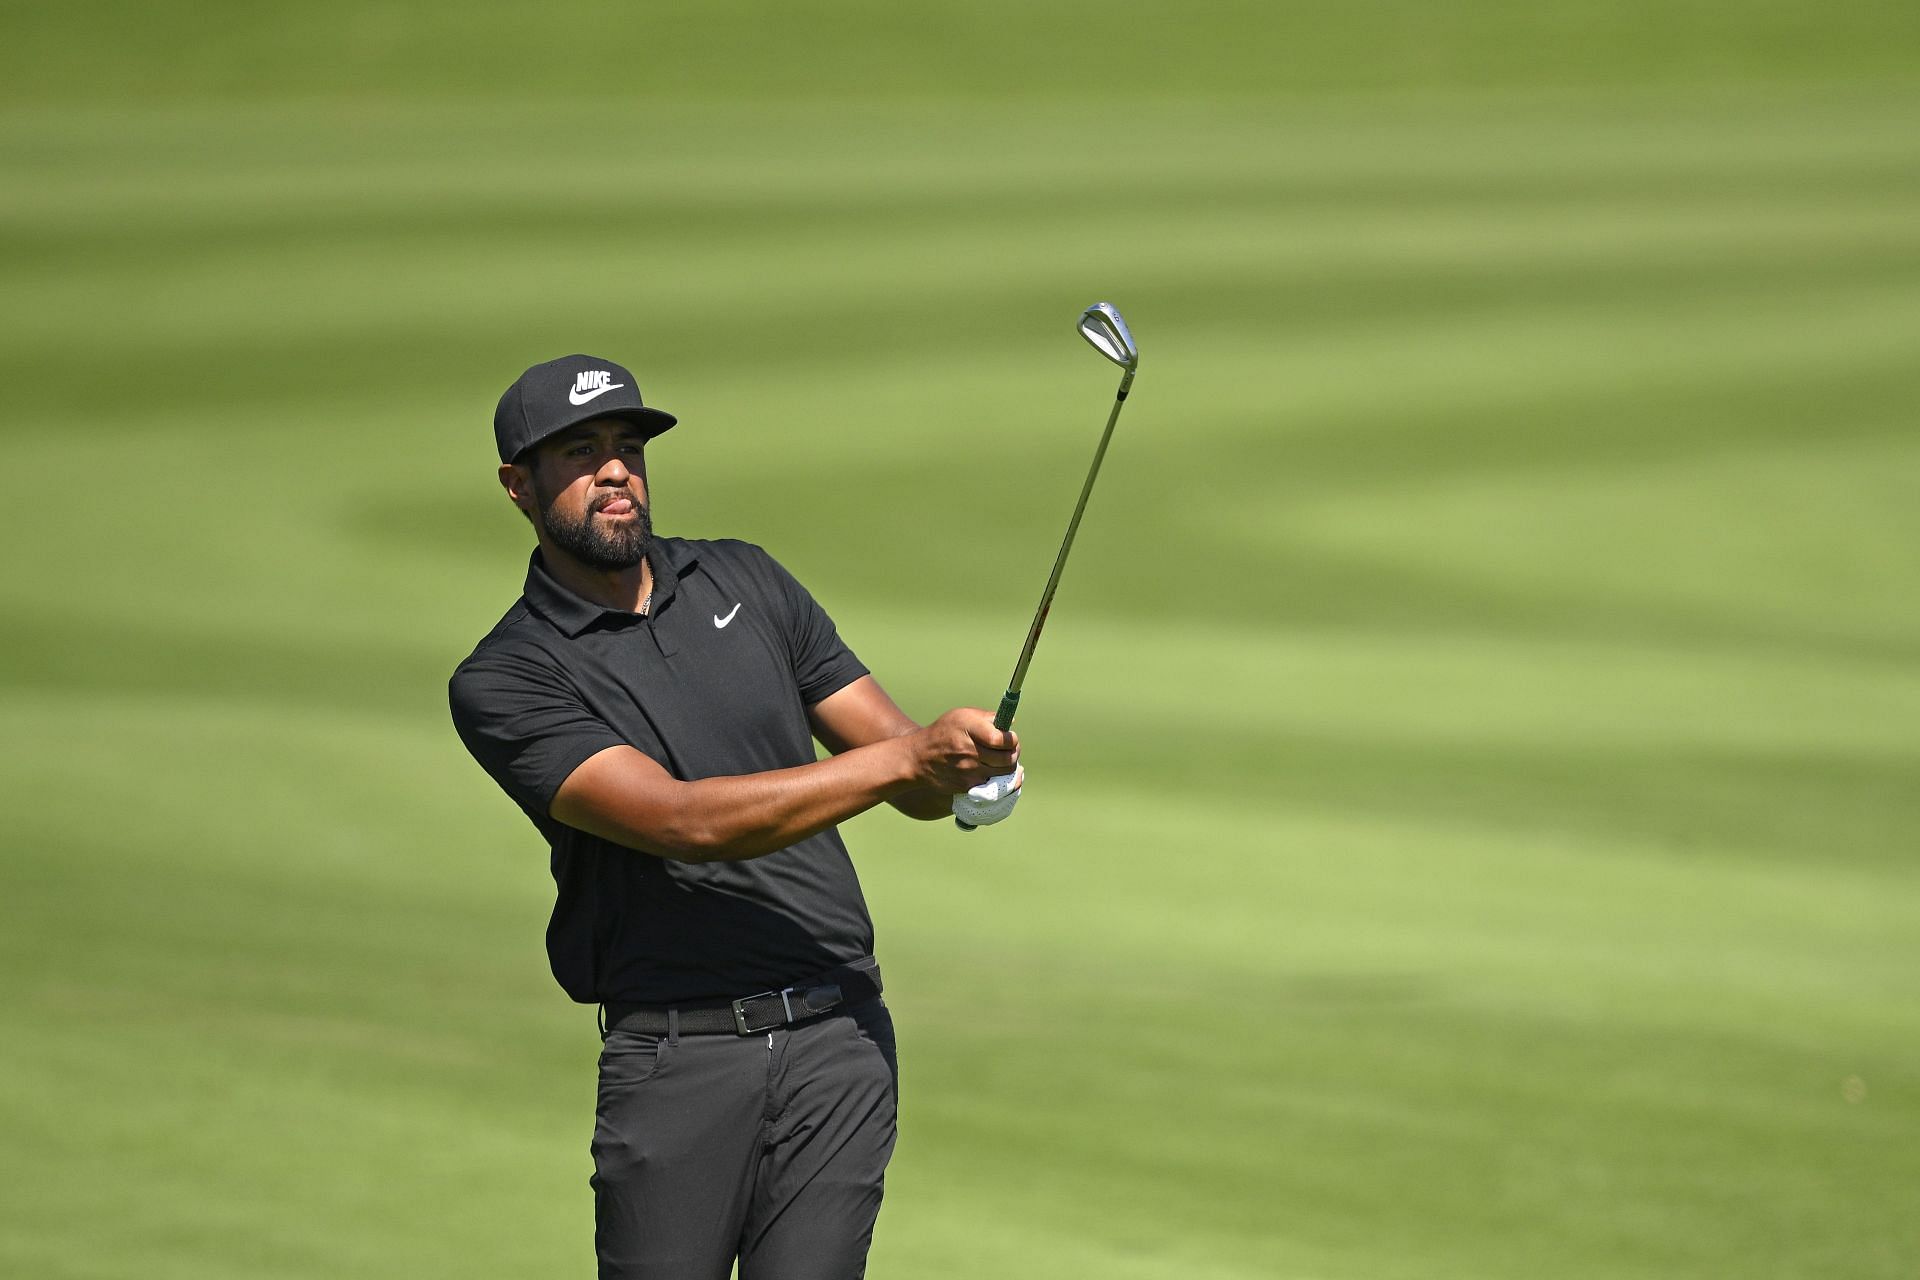 Tony Finau played well at the Mexico Open